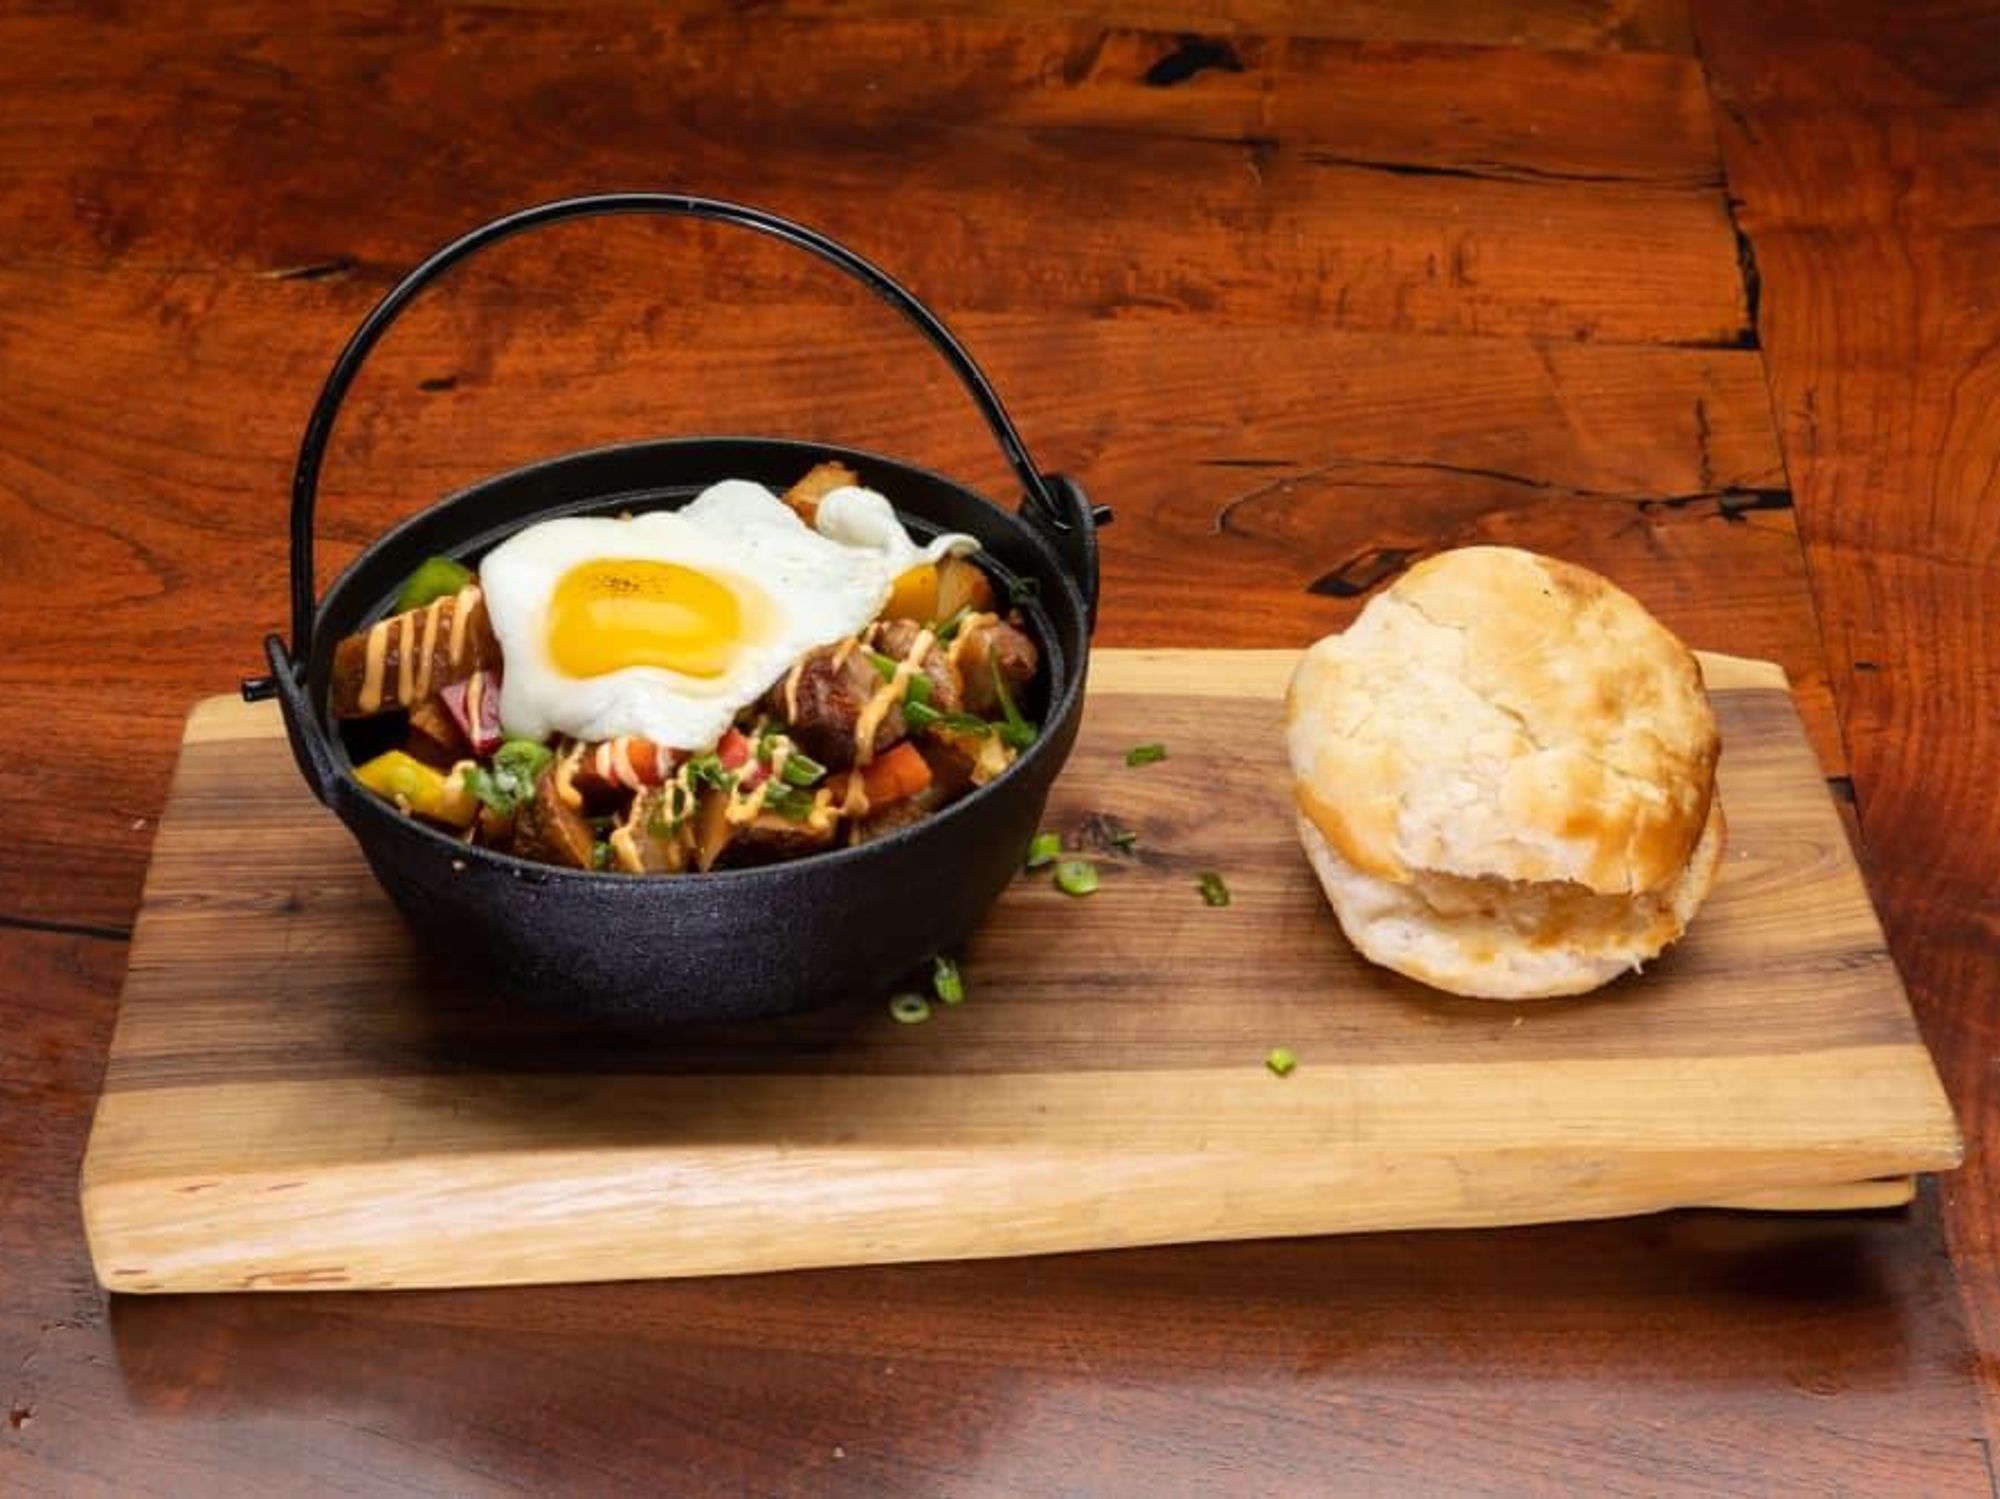 Egg hash and biscuit